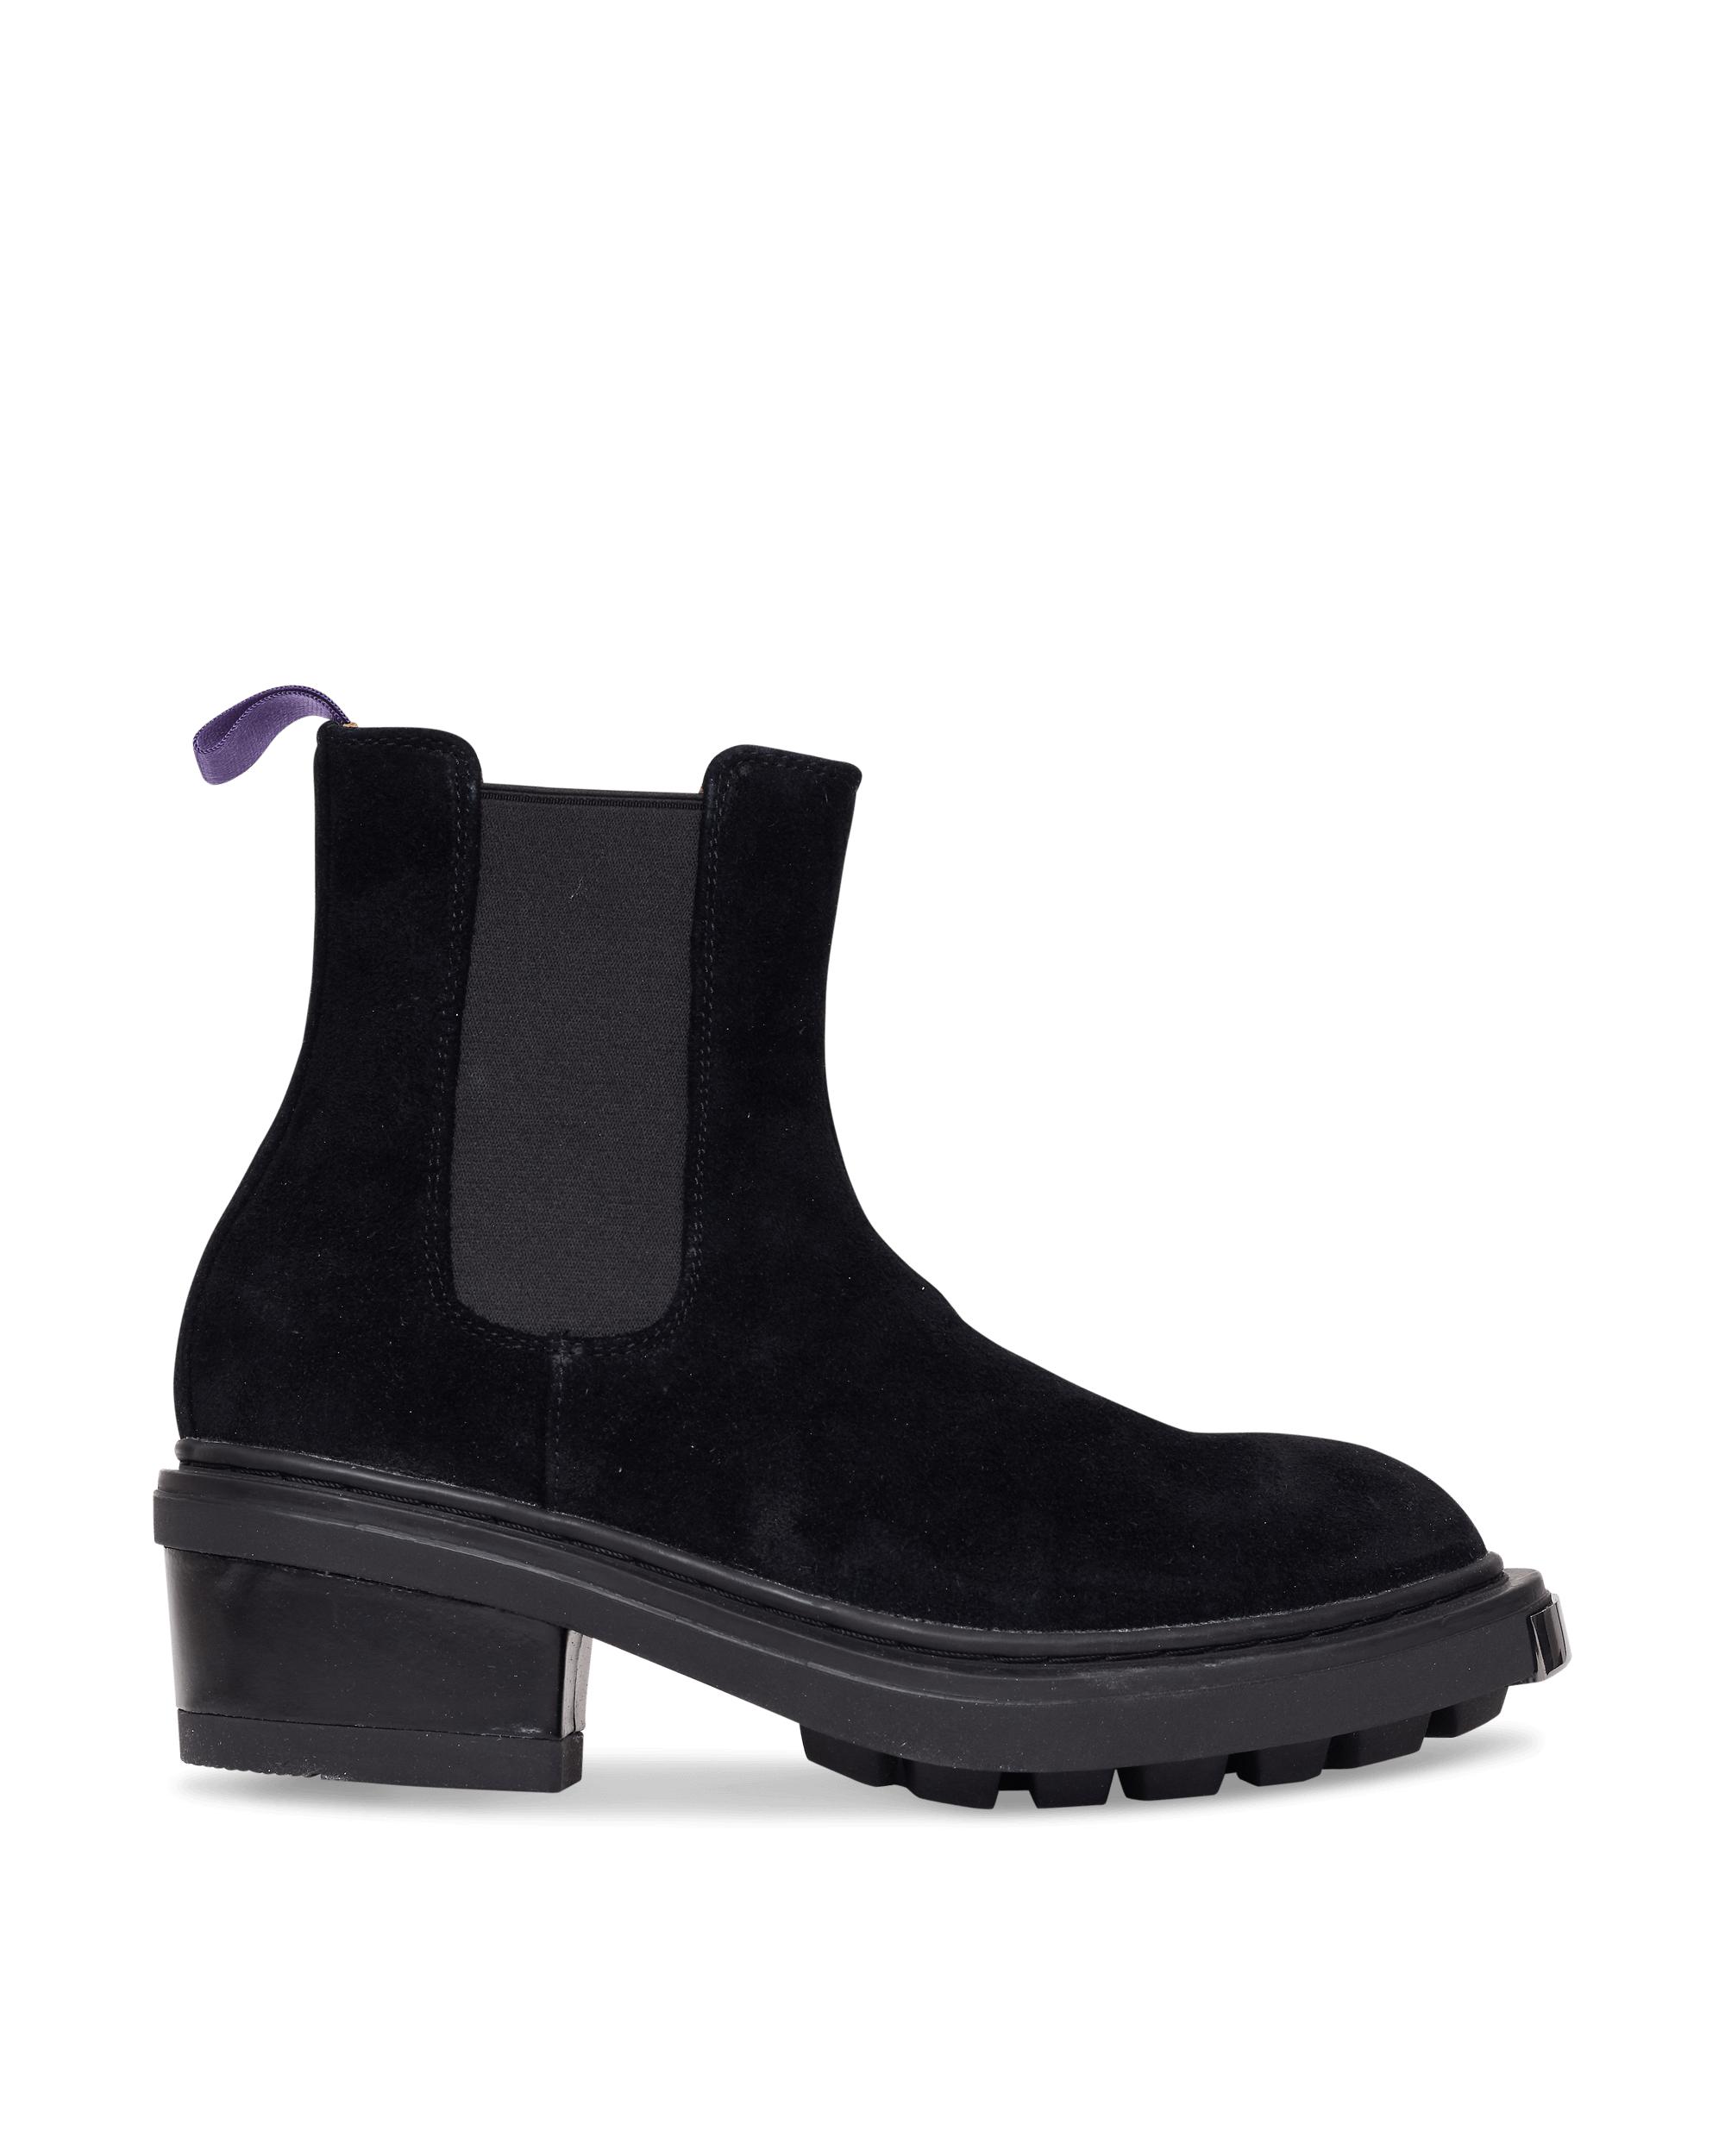 Eytys Nikita Suede Boots in Black for Men - Lyst